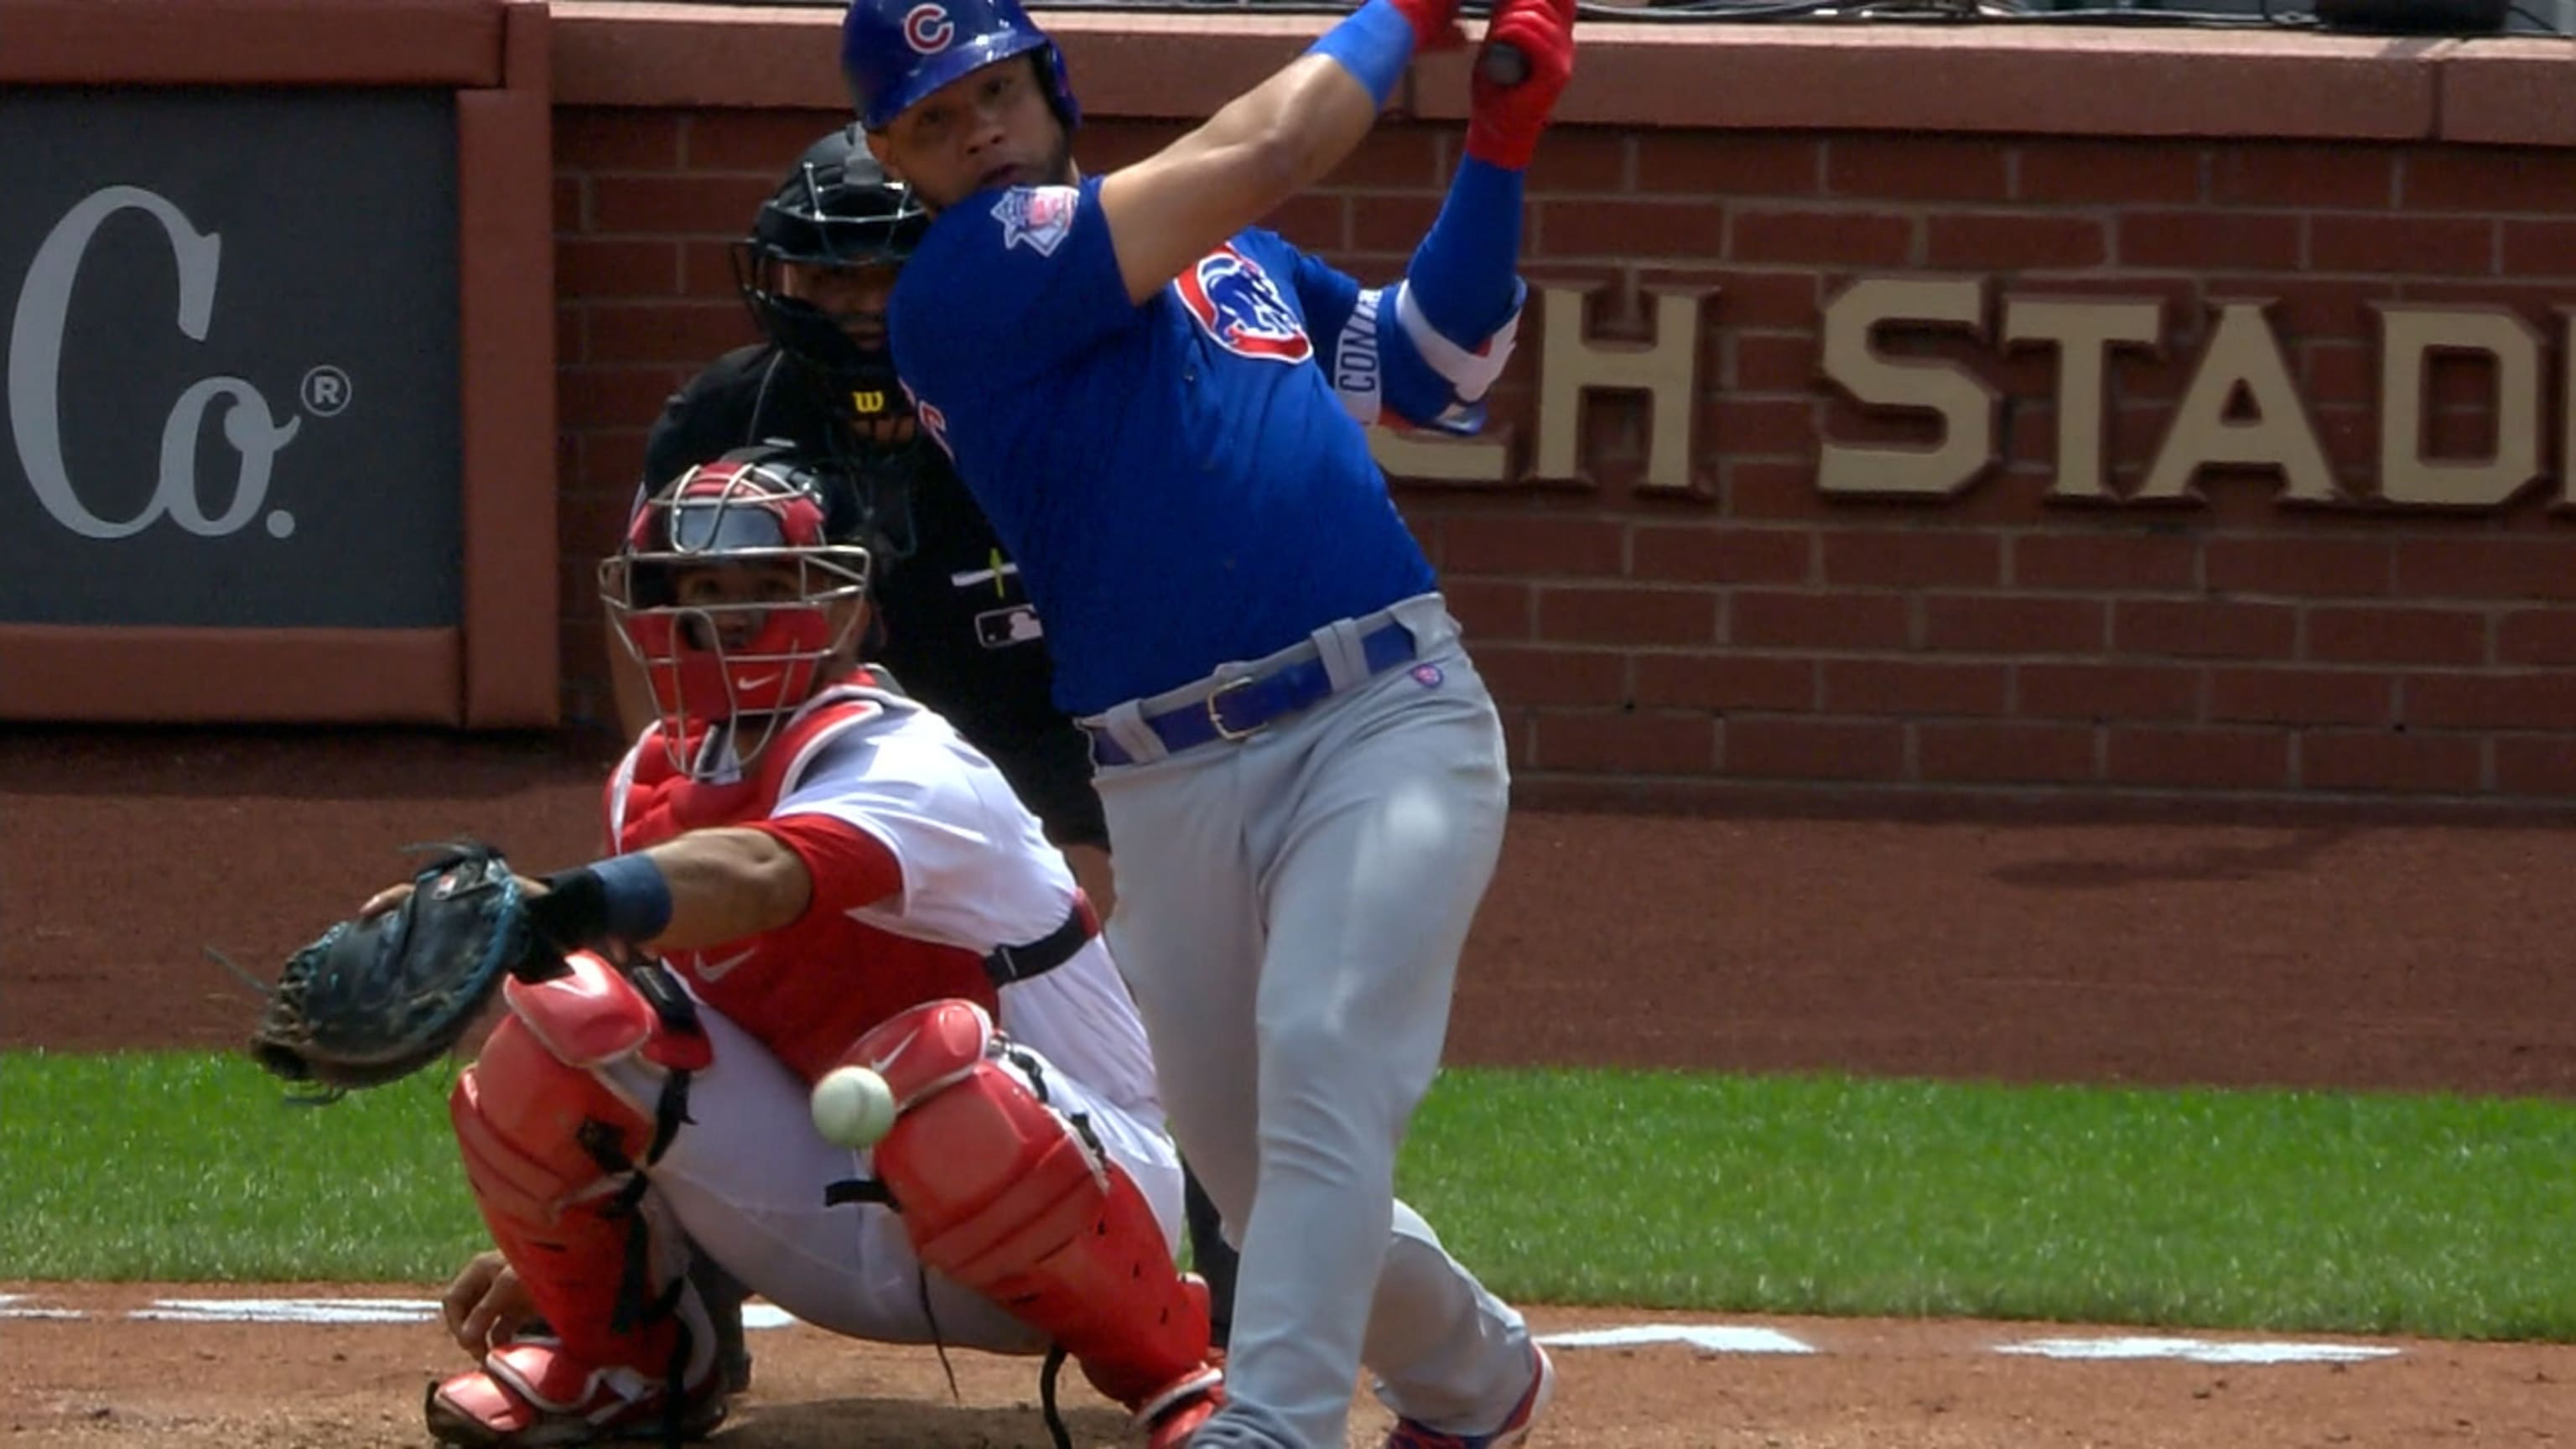 It's tough': What Willson Contreras has been feeling as Cubs play final  homestand before trade deadline - Marquee Sports Network